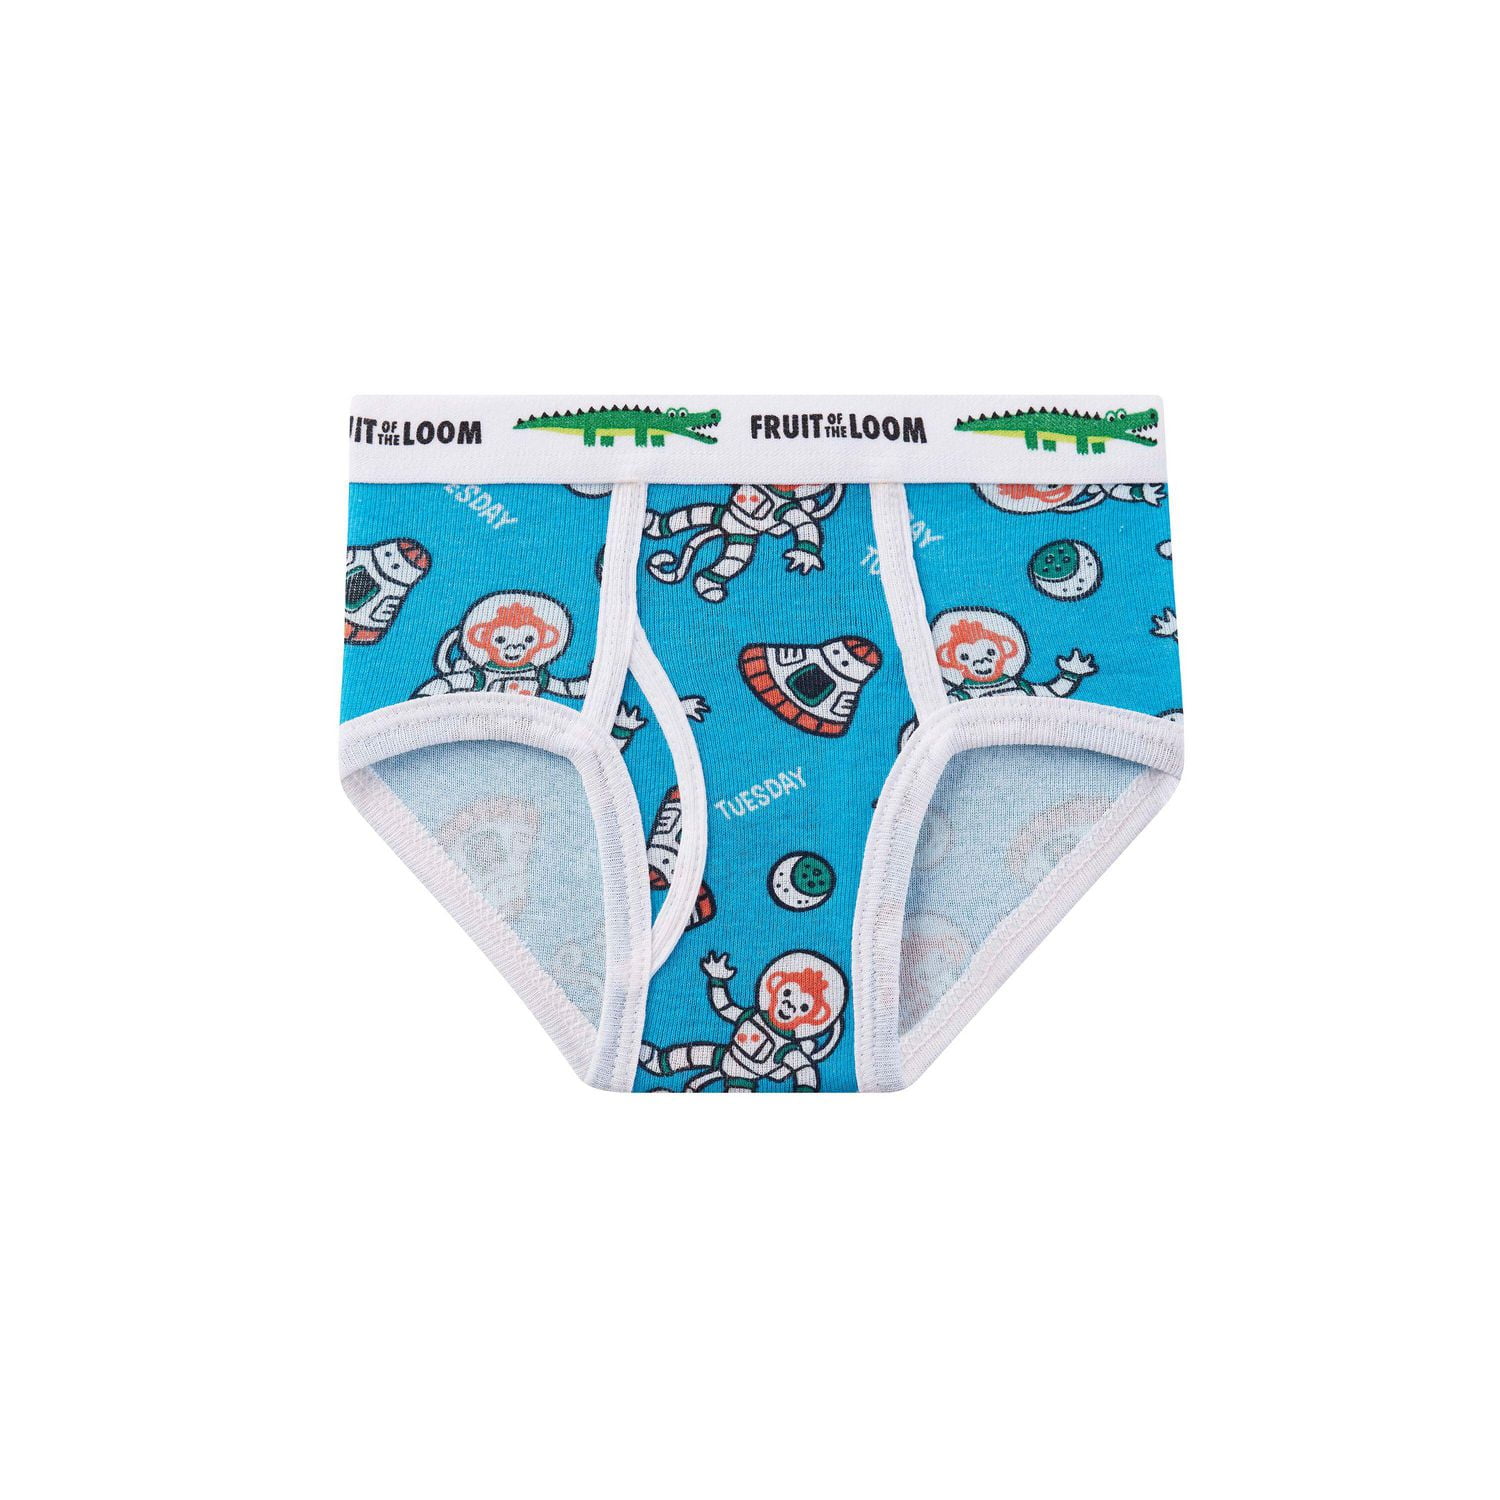 SSE 6 pcs Fancy Cotton underwear or Drawer For Baby Boys & Baby